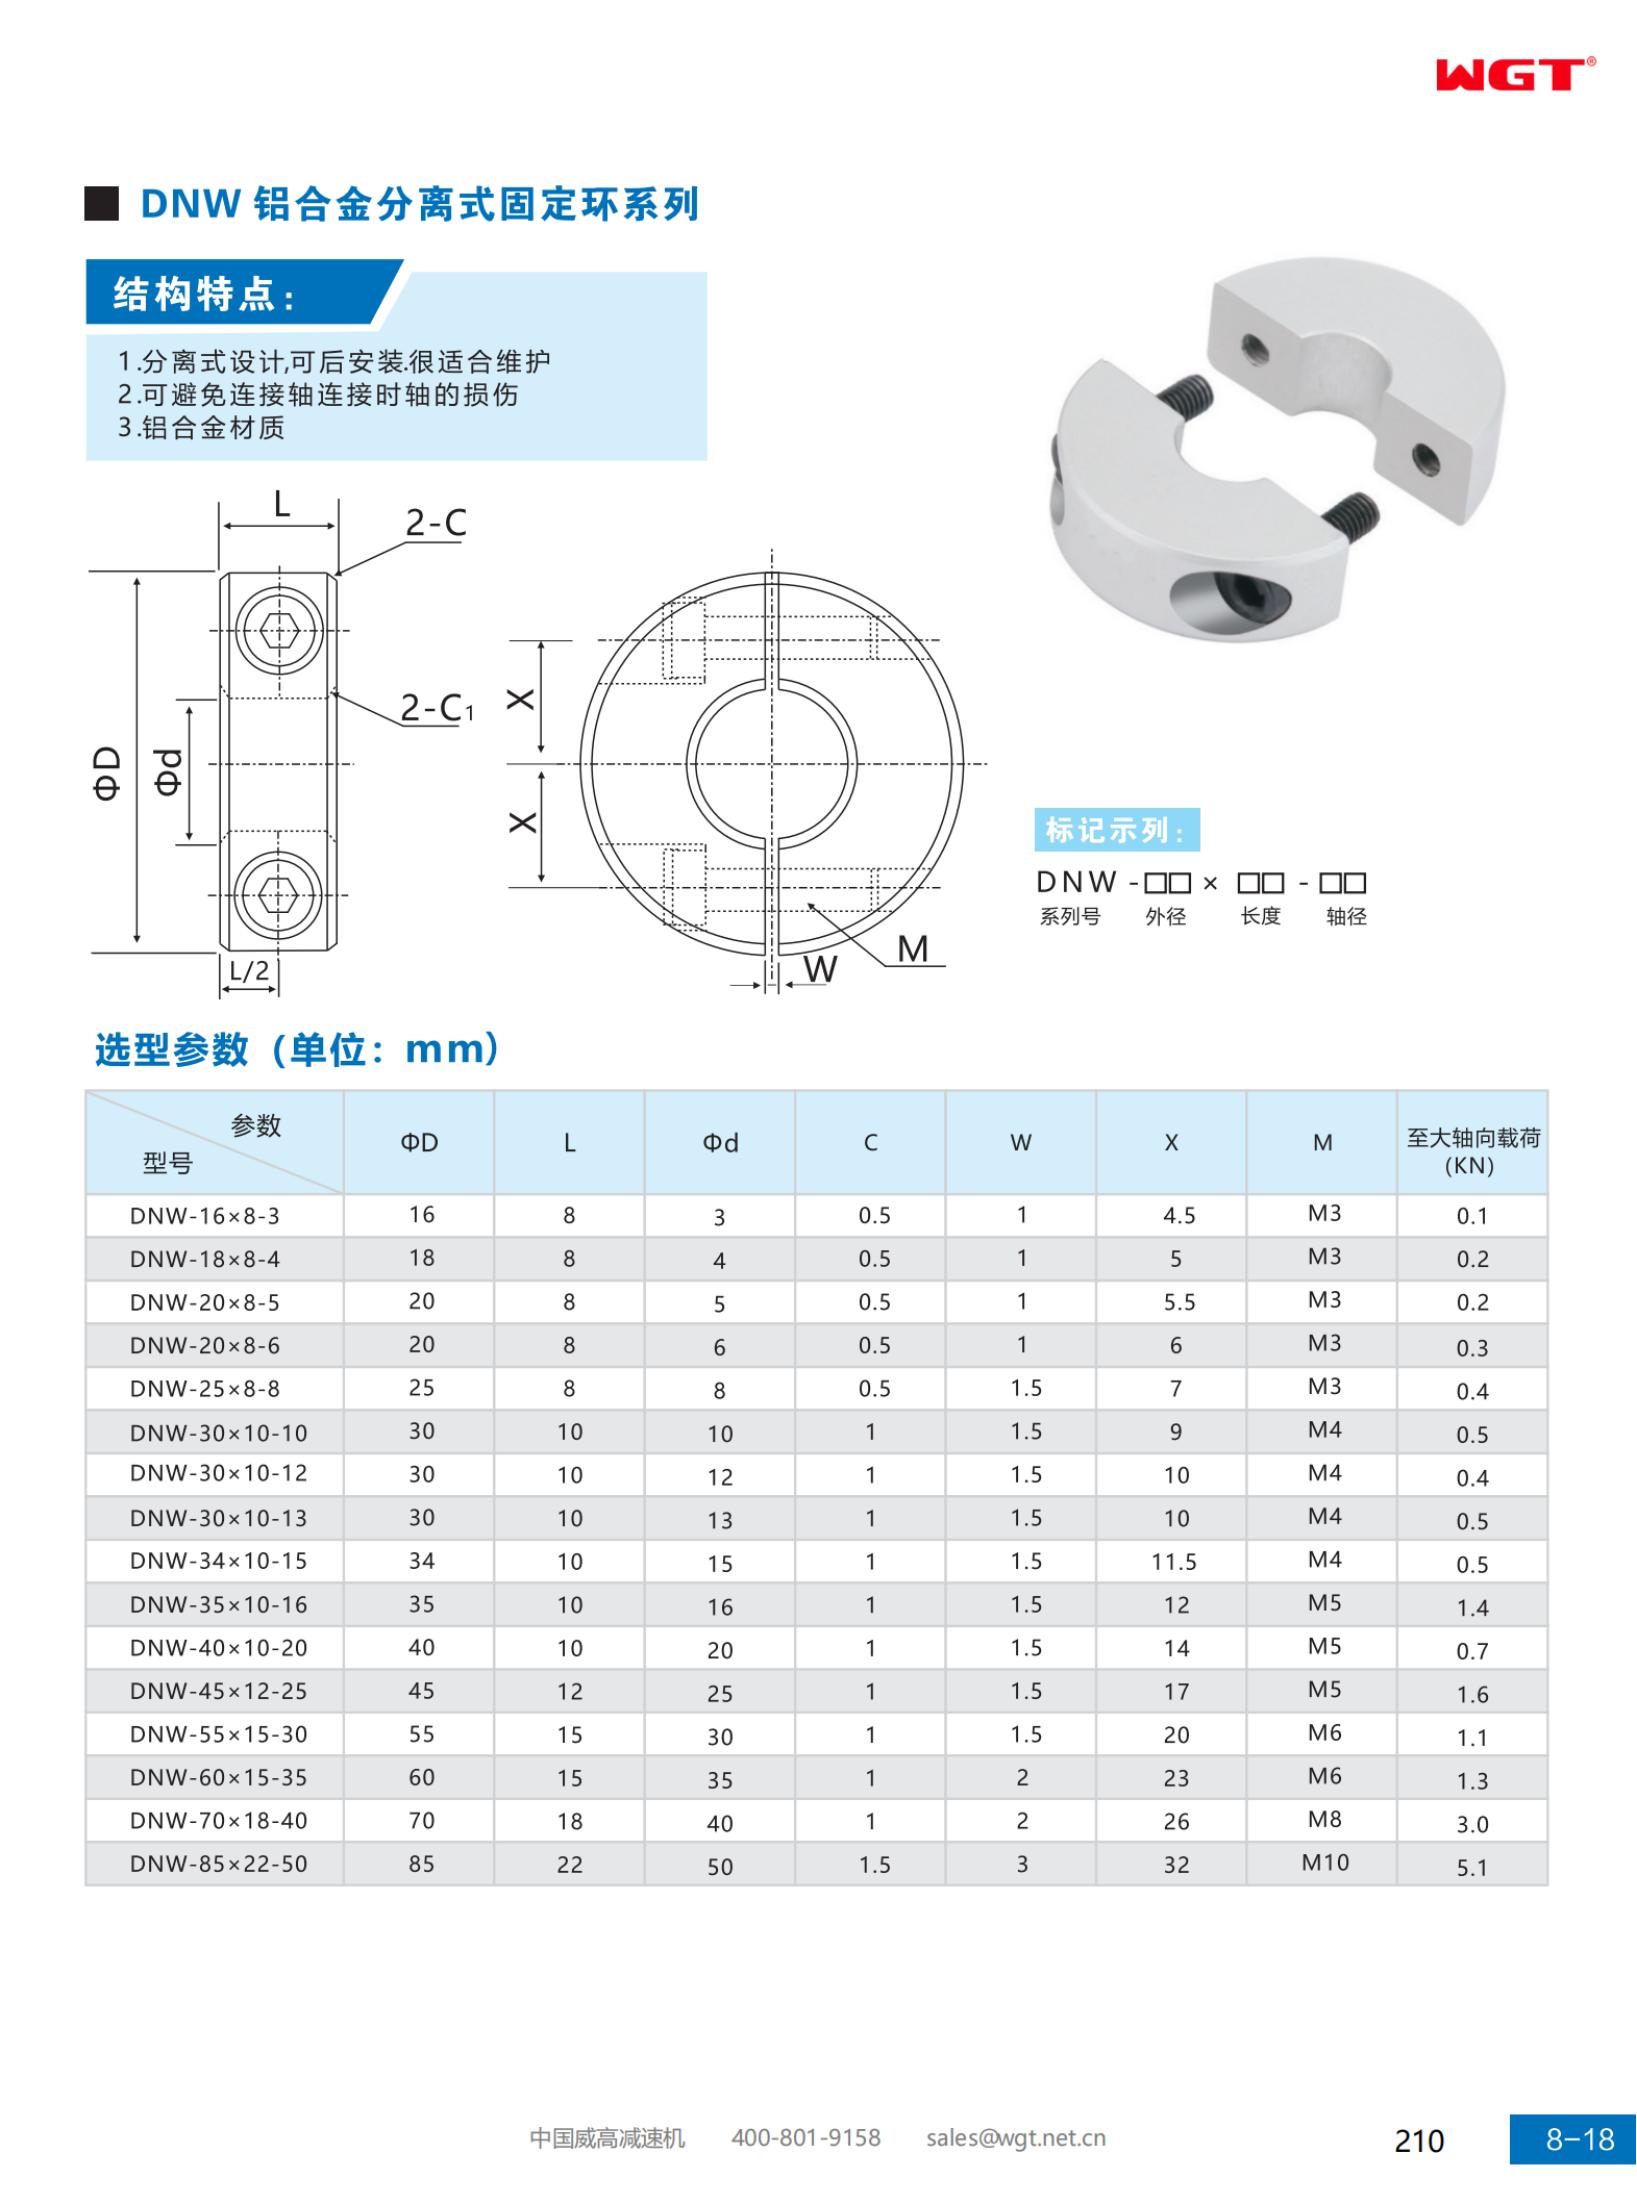 DNW aluminum alloy separate fixed ring series